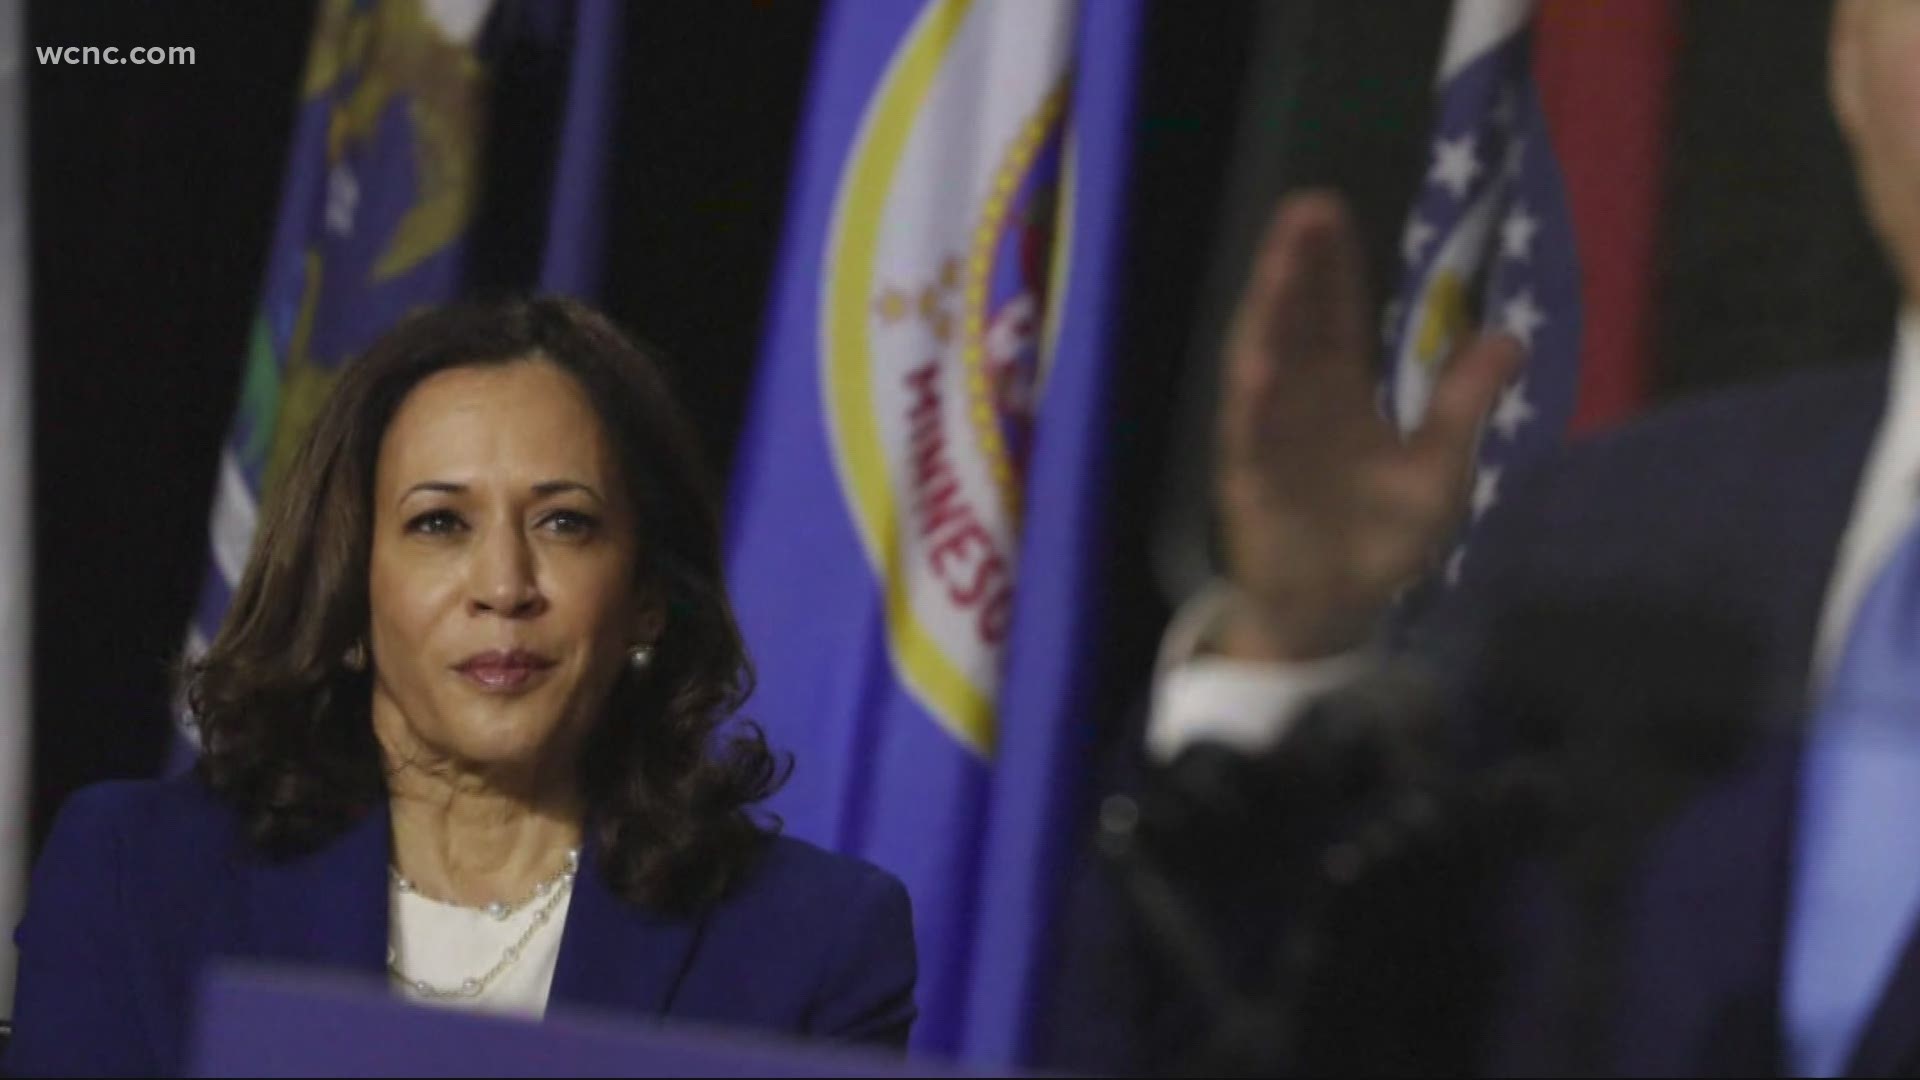 The election of Kamala Harris serve in the second highest position in the land elevated the hopes of women, women of color and many more.